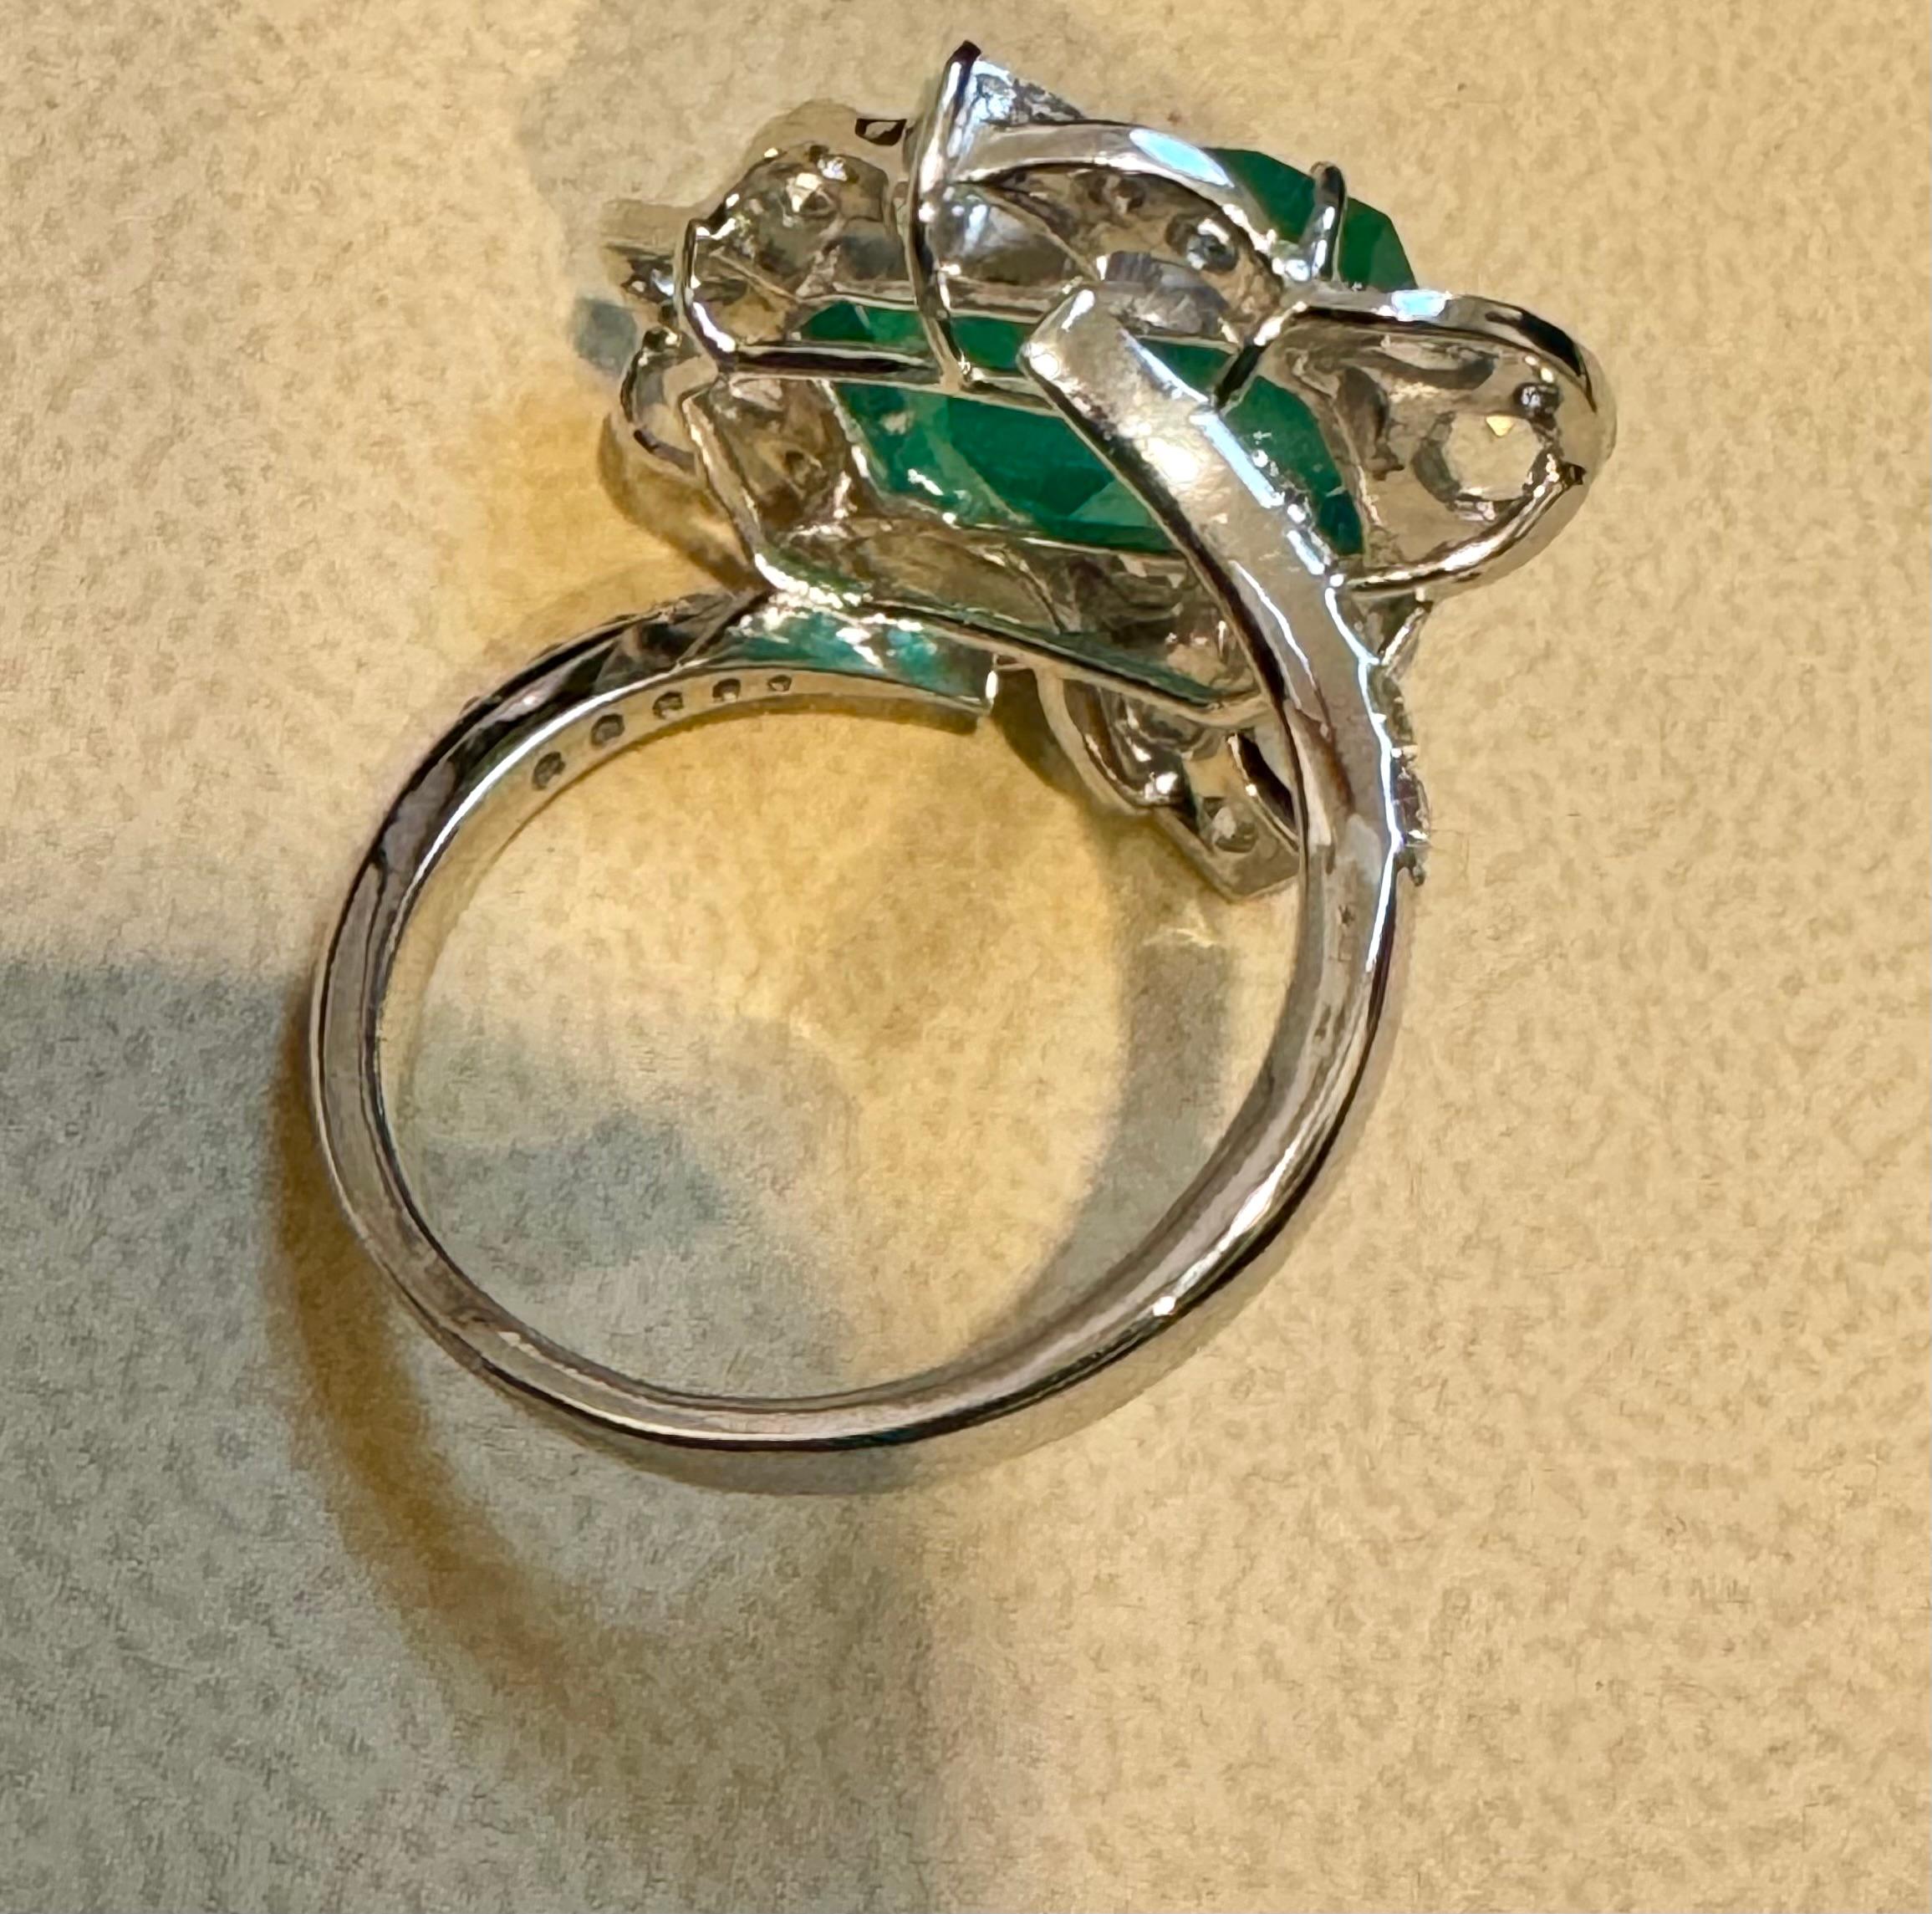 7 Ct Finest Zambian Emerald Cut Emerald & 1.5Ct Diamond Ring, 18 Kt Gold Size 9
 This classic ring features an Emerald cut Zambian emerald of extreme fine quality, boasting a desirable color and luster, originating from Zambia. Accompanied by many 